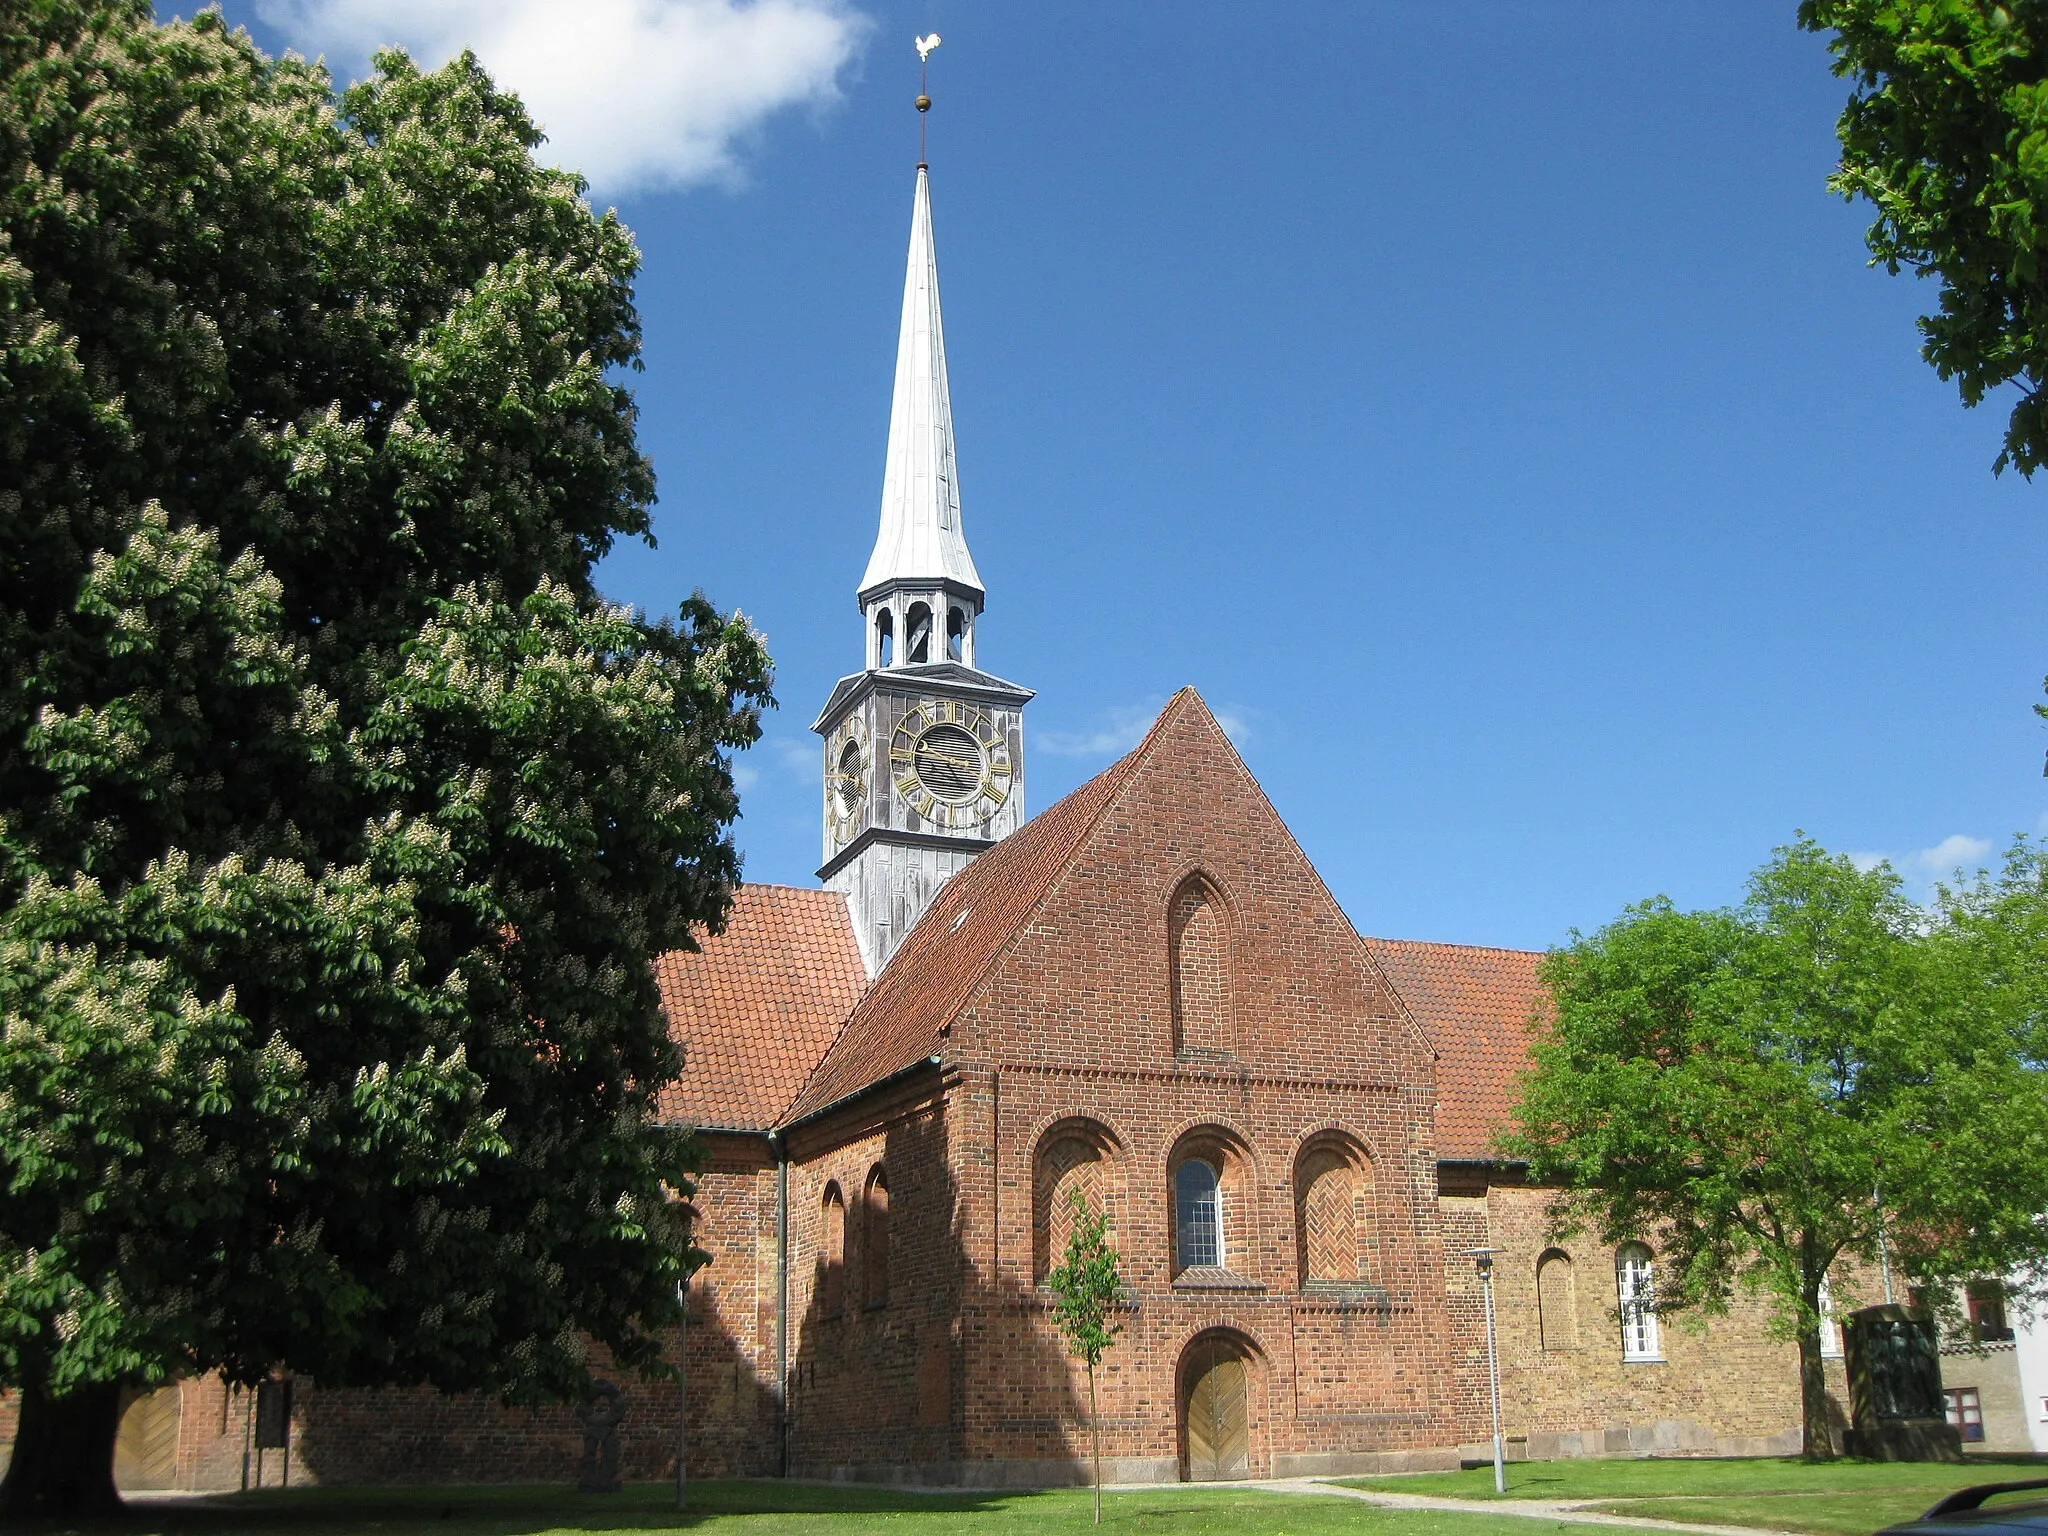 Photo showing: The church "Sct. Nicolai Kirke" in the town "Aabenraa". The town is located in Southern Jutland, Denmark.